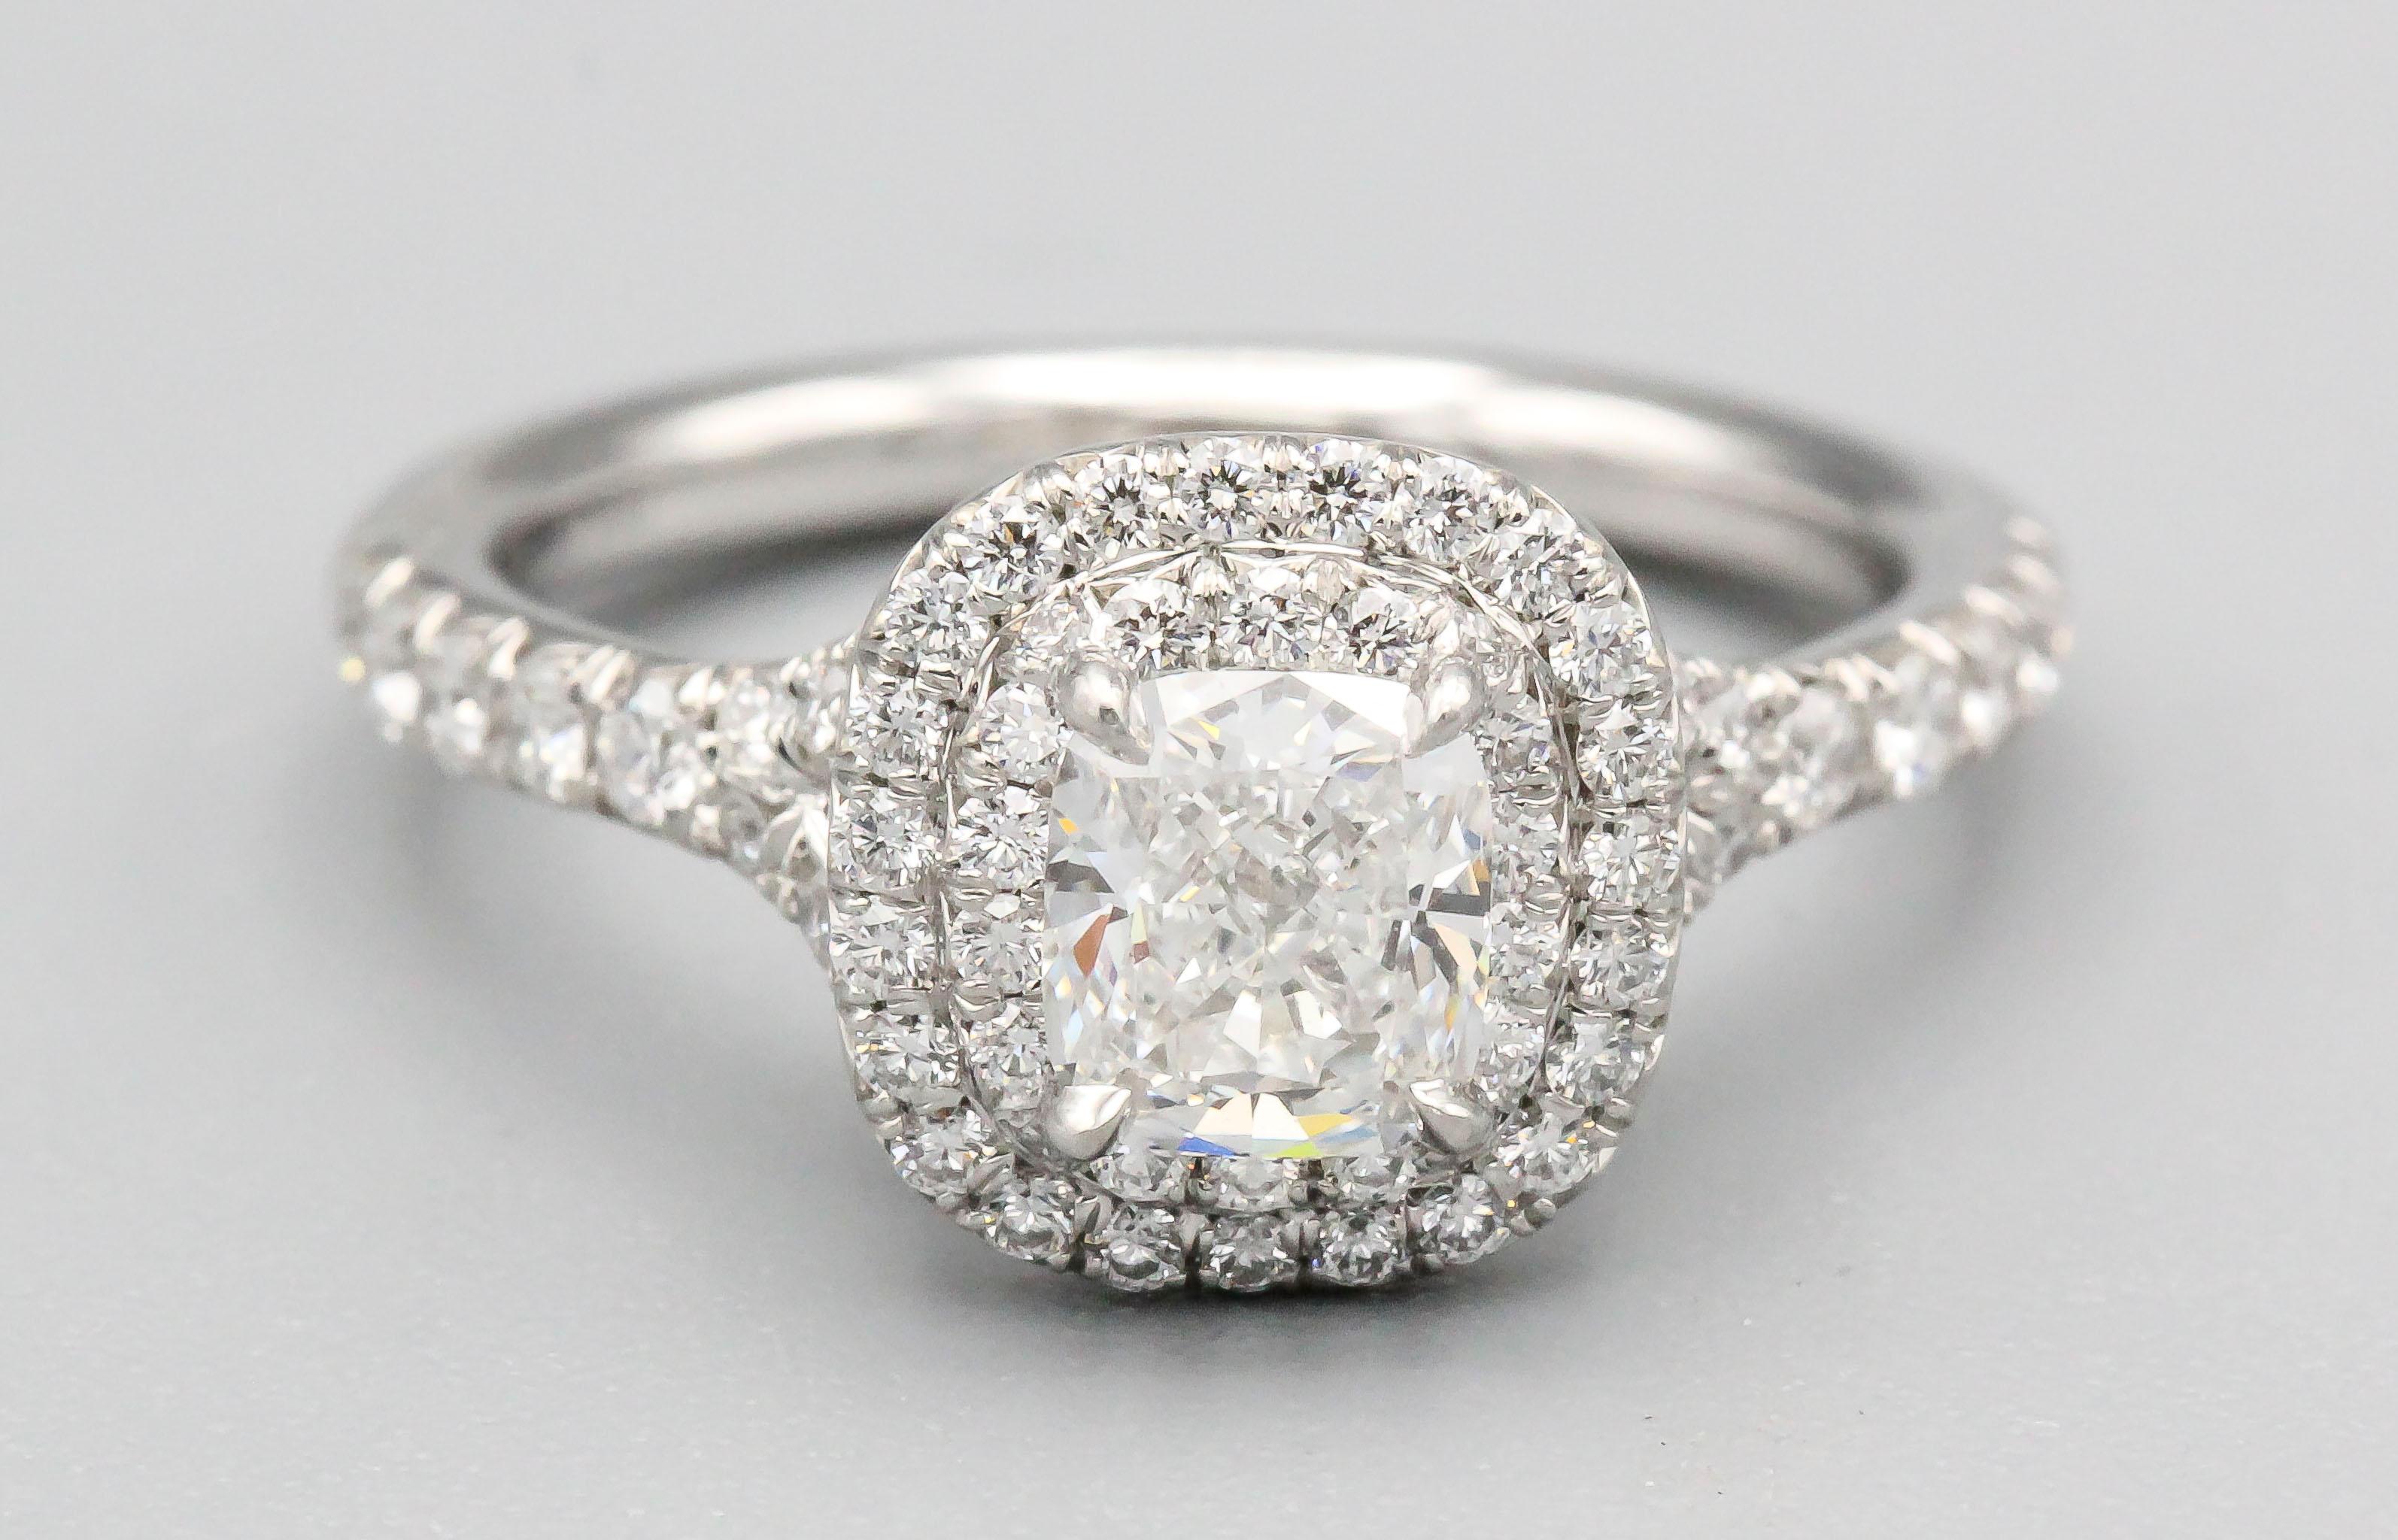 Elegant diamond and platinum engagement ring by Tiffany & Co. It features high grade round brilliant cut diamonds throughout with the central stone being 0.56ct, F color, VVS2 clarity. Ring size 5.5.

Hallmarks: Tiffany & Co., PT 950, 0.56ct,